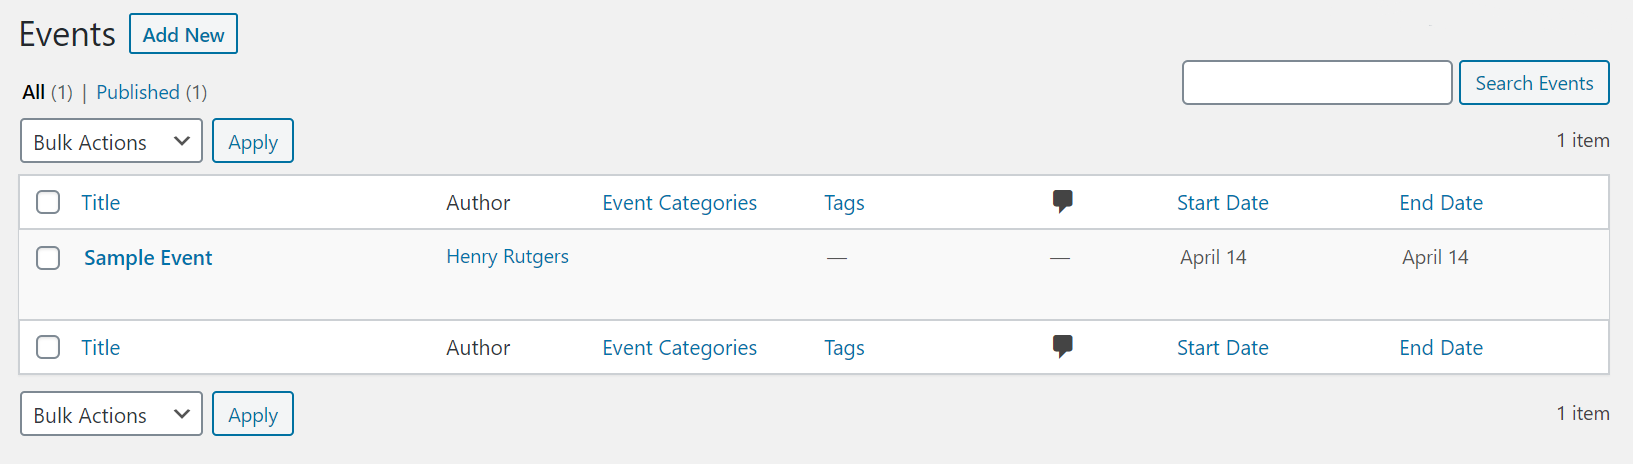 backend view of all events